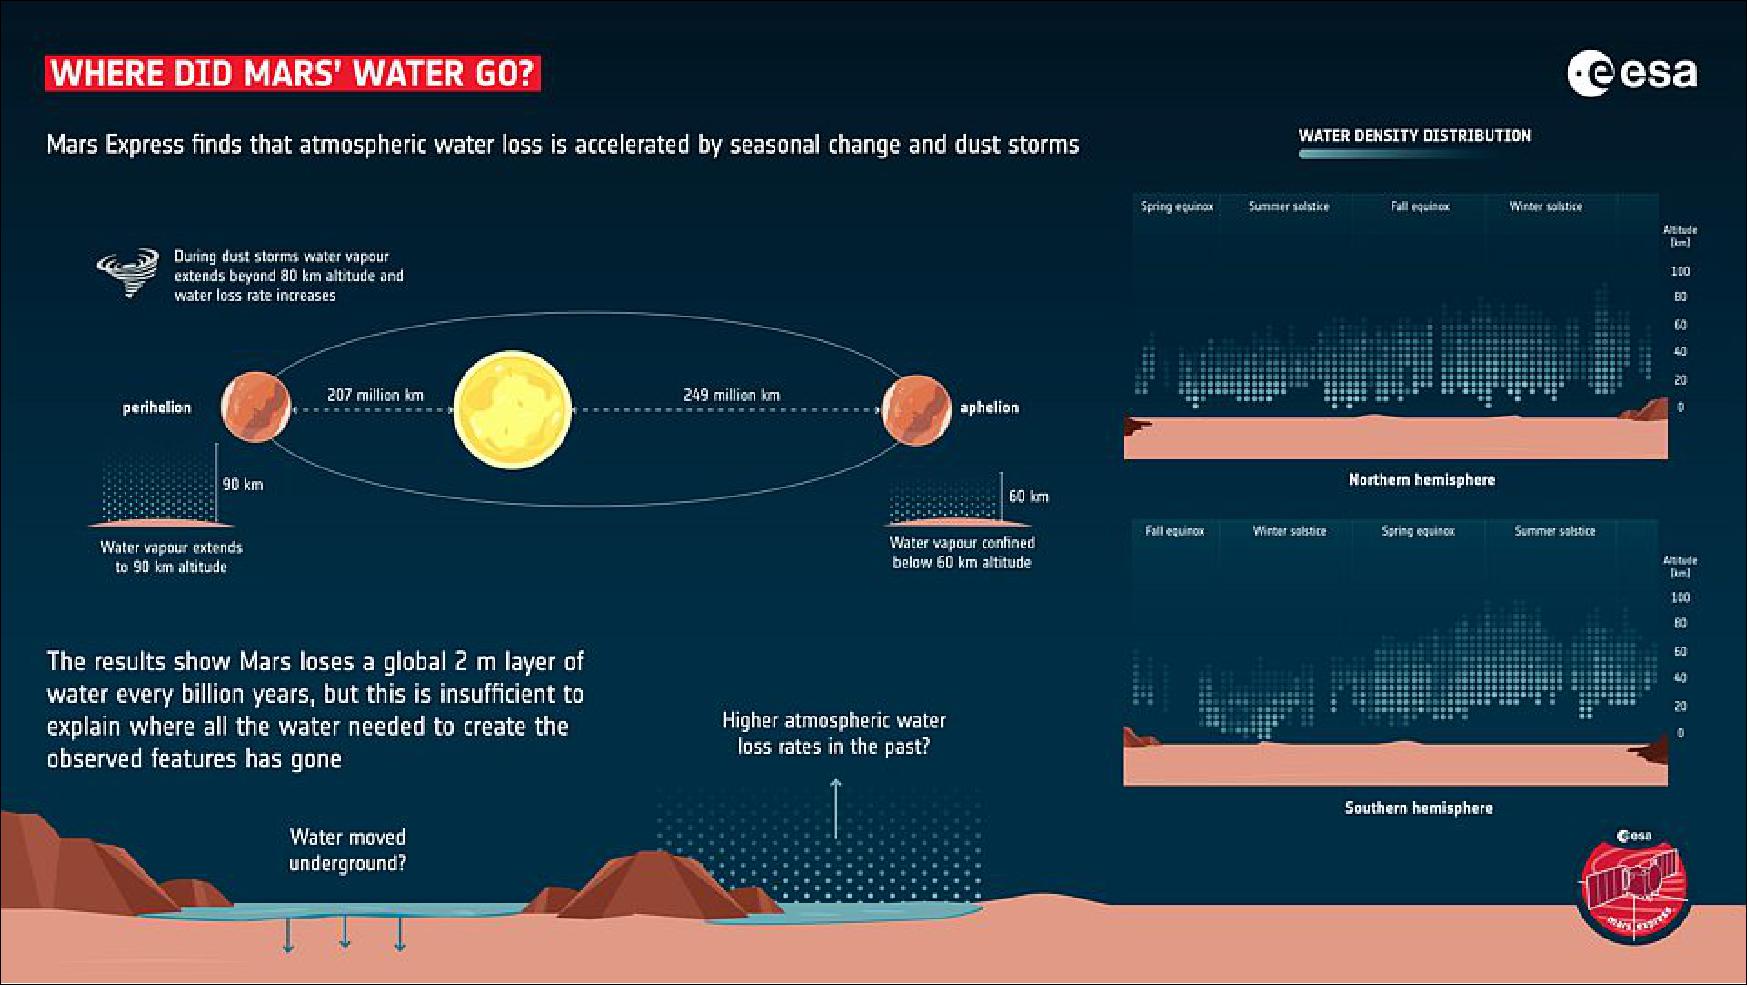 Figure 48: ESA’s Mars Express finds that atmospheric water loss is accelerated by seasonal change and dust storms. Across a full orbit, the distance between the Sun and Mars ranges from 207 million to 249 million km. The results found that water vapor remained confined to below 60 km when Mars was far from the Sun but extended up to 90 km in altitude when Mars was closest to the Sun. The atmosphere also has a greater water density during southern hemisphere summer, enhanced by the planet’s closer proximity to the Sun. Furthermore, in years when Mars experienced a global dust storm the upper atmosphere became even wetter, accumulating water in excess at altitudes of over 80 km (the global dust storm data is not shown in the graph). - The study finds that Mars loses a global 2 m layer of water every billion years, but this is insufficient to explain where all the water needed to create the observed water-carved features on the planet has gone. The results suggest that either this water has moved underground, or that atmospheric water escape rates were far higher in the past [image credit: ESA; data: A. Fedorova et al (2021)]